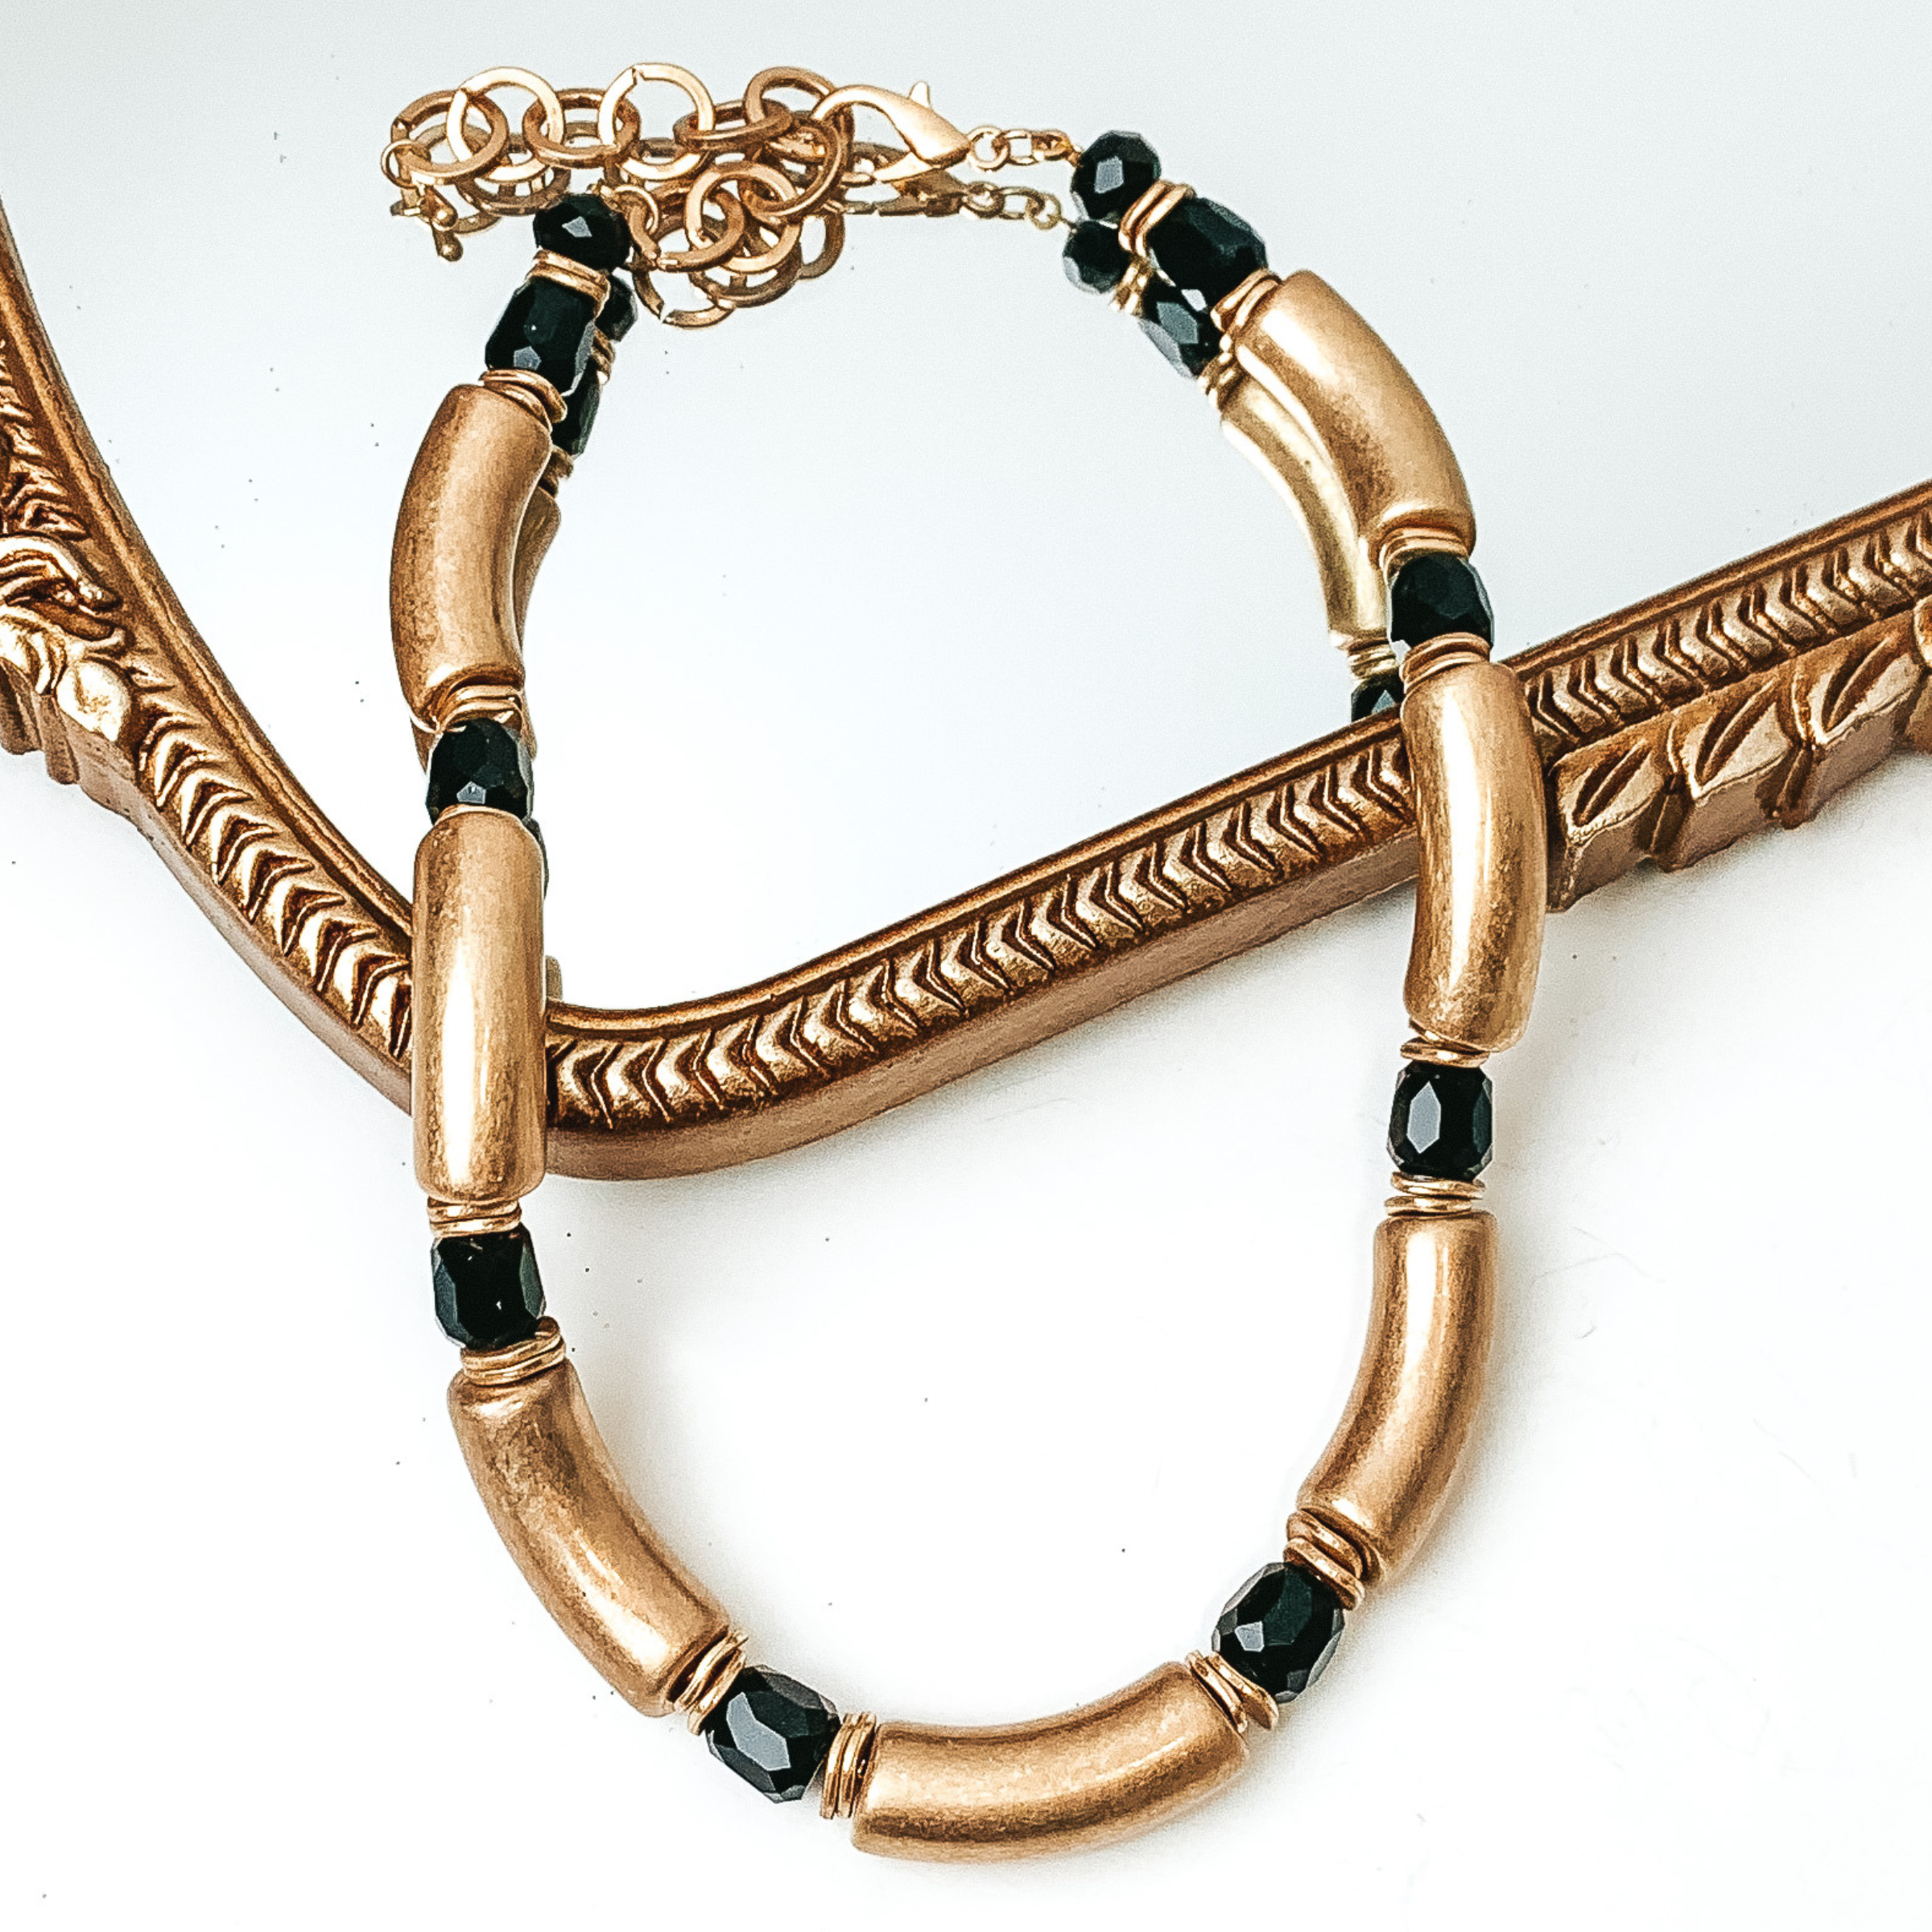 Gold tube necklae with black crystal bead spacers. This necklace is pictured partially laying on a gold mirror on a white background. 